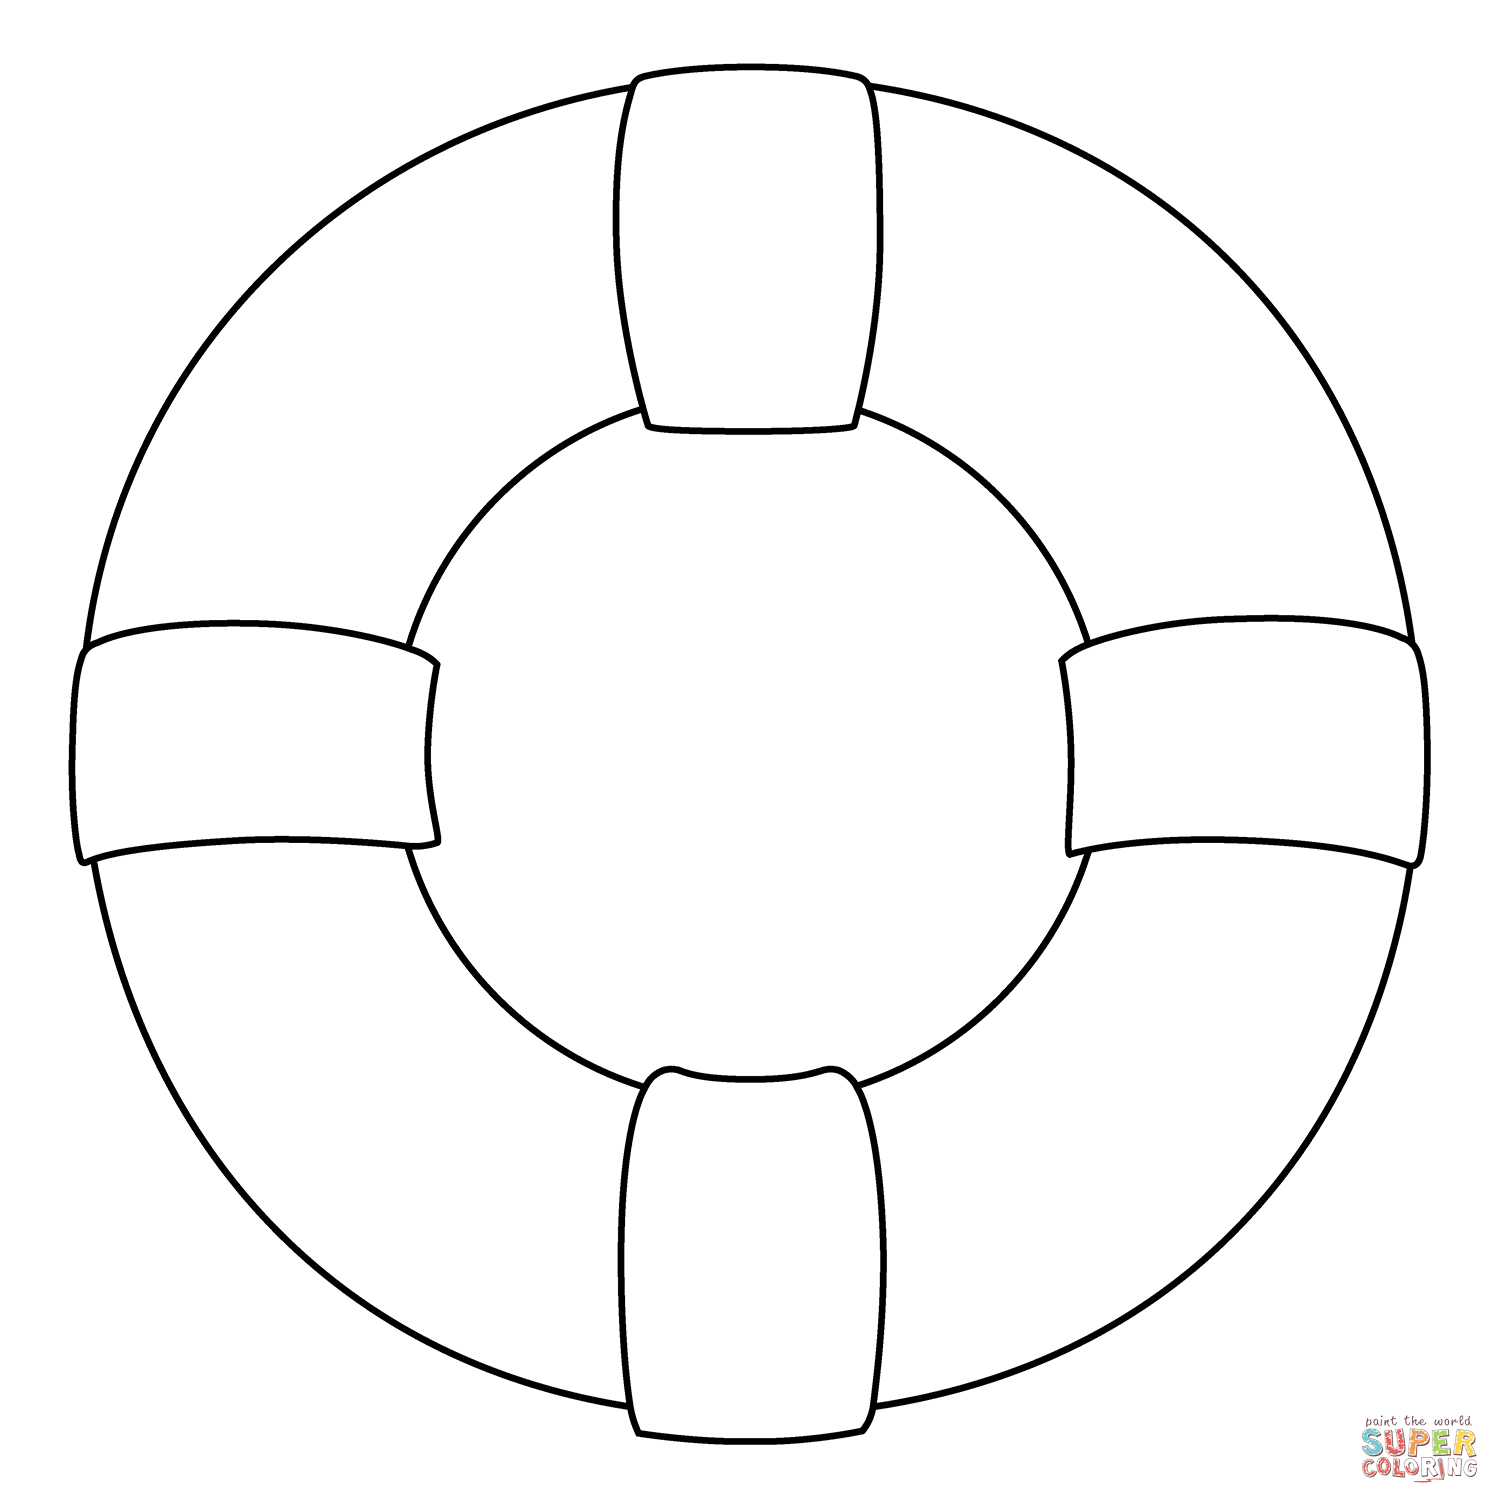 Ring buoy emoji coloring page free printable coloring pages